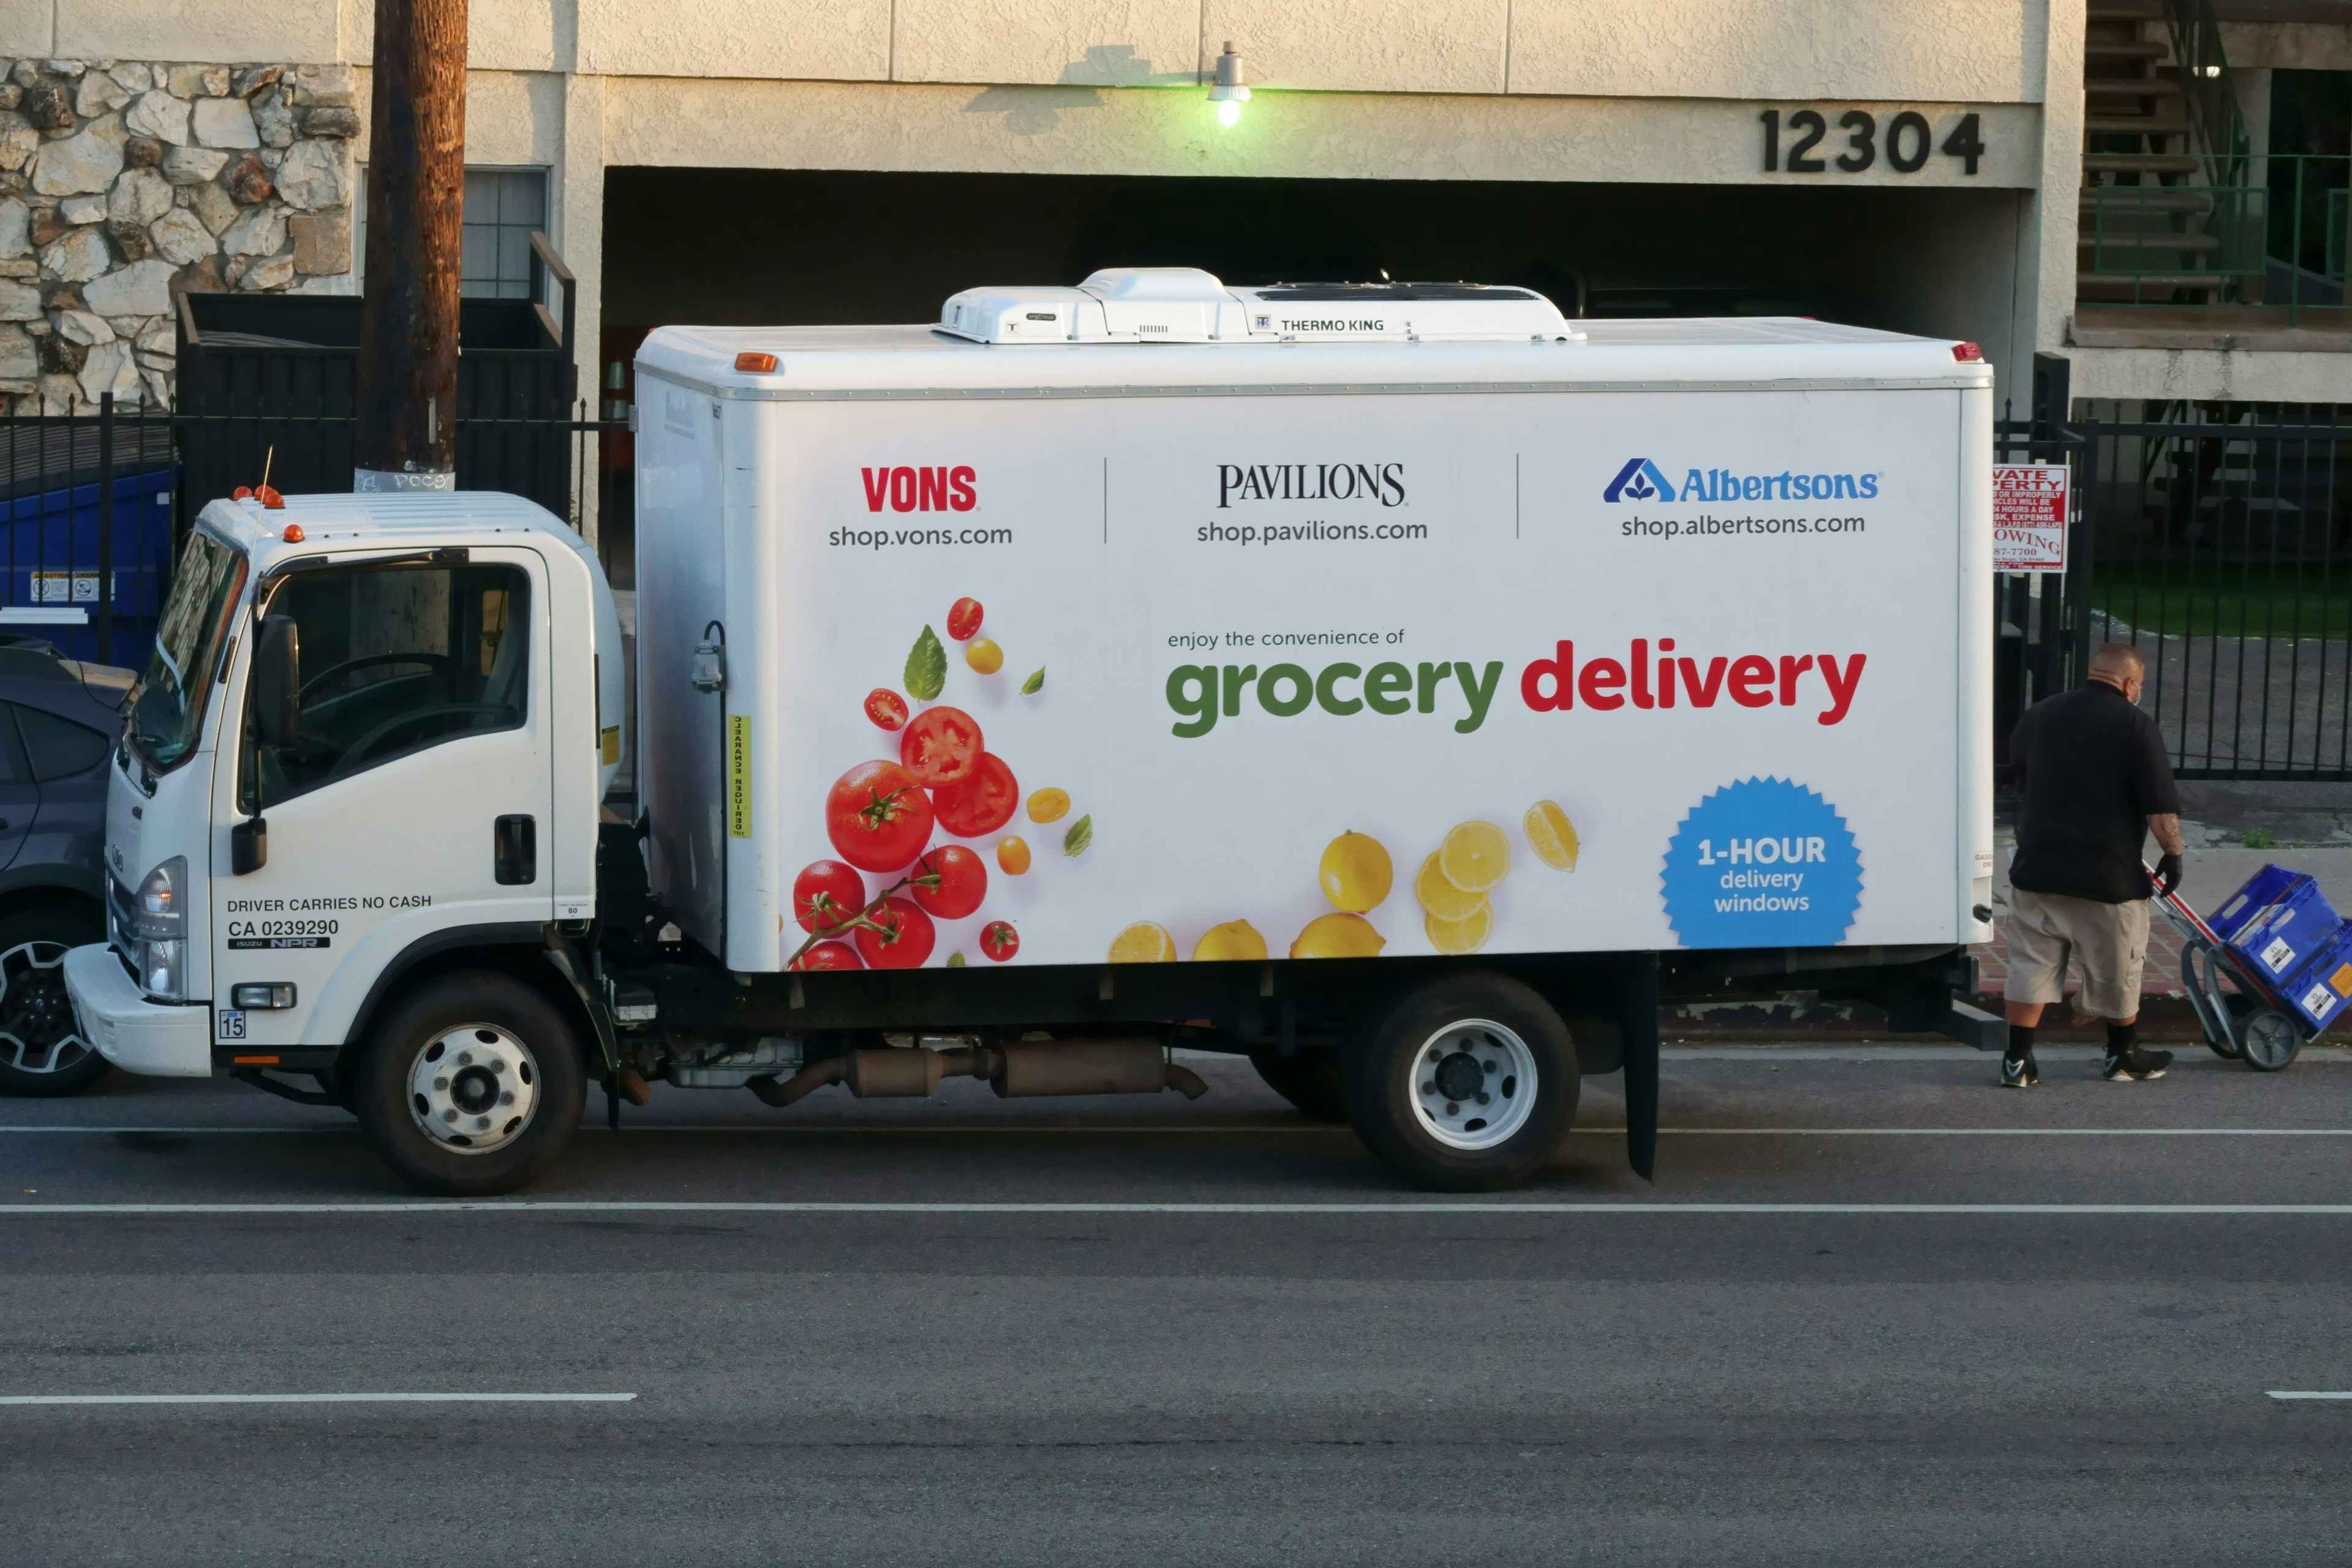 Vons, Pavilions, and Albertsons grocery delivery truck.